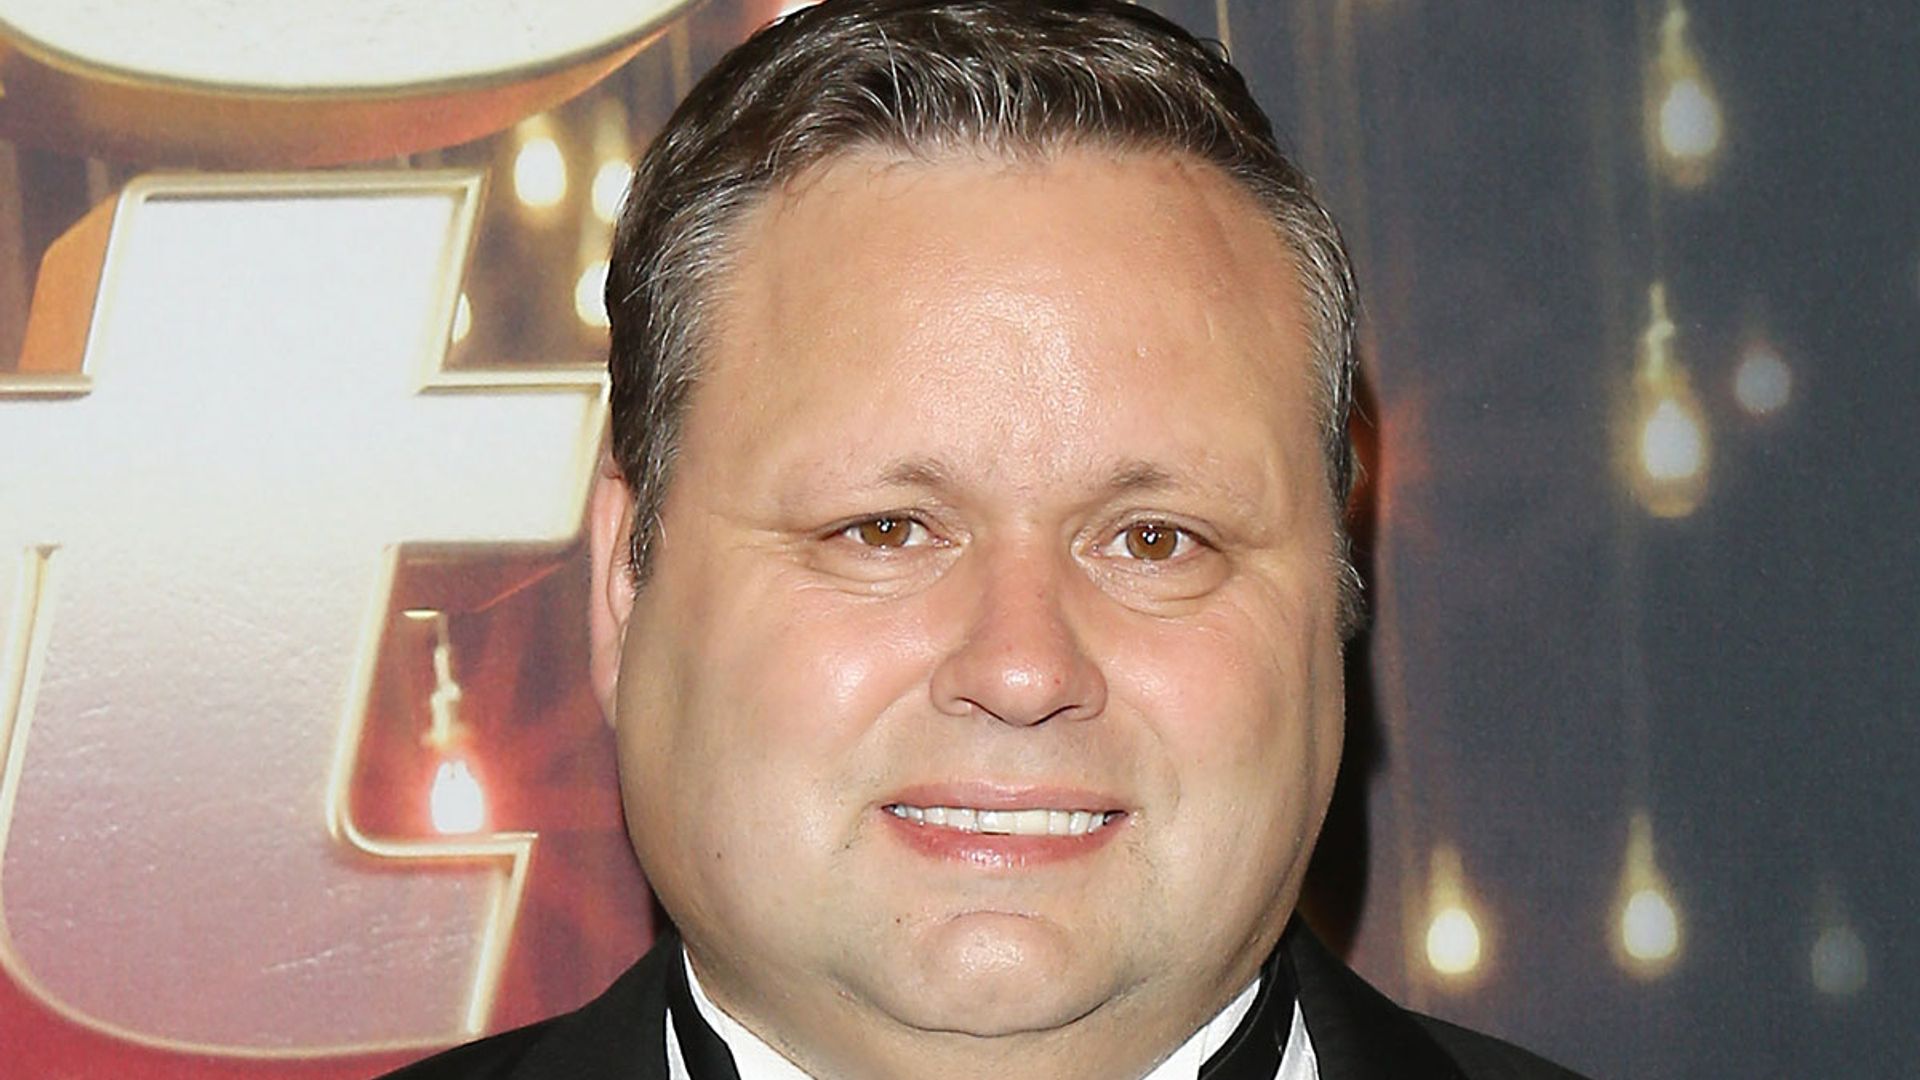 Britain's Got Talent's Paul Potts reveals painful injuries after nasty fall